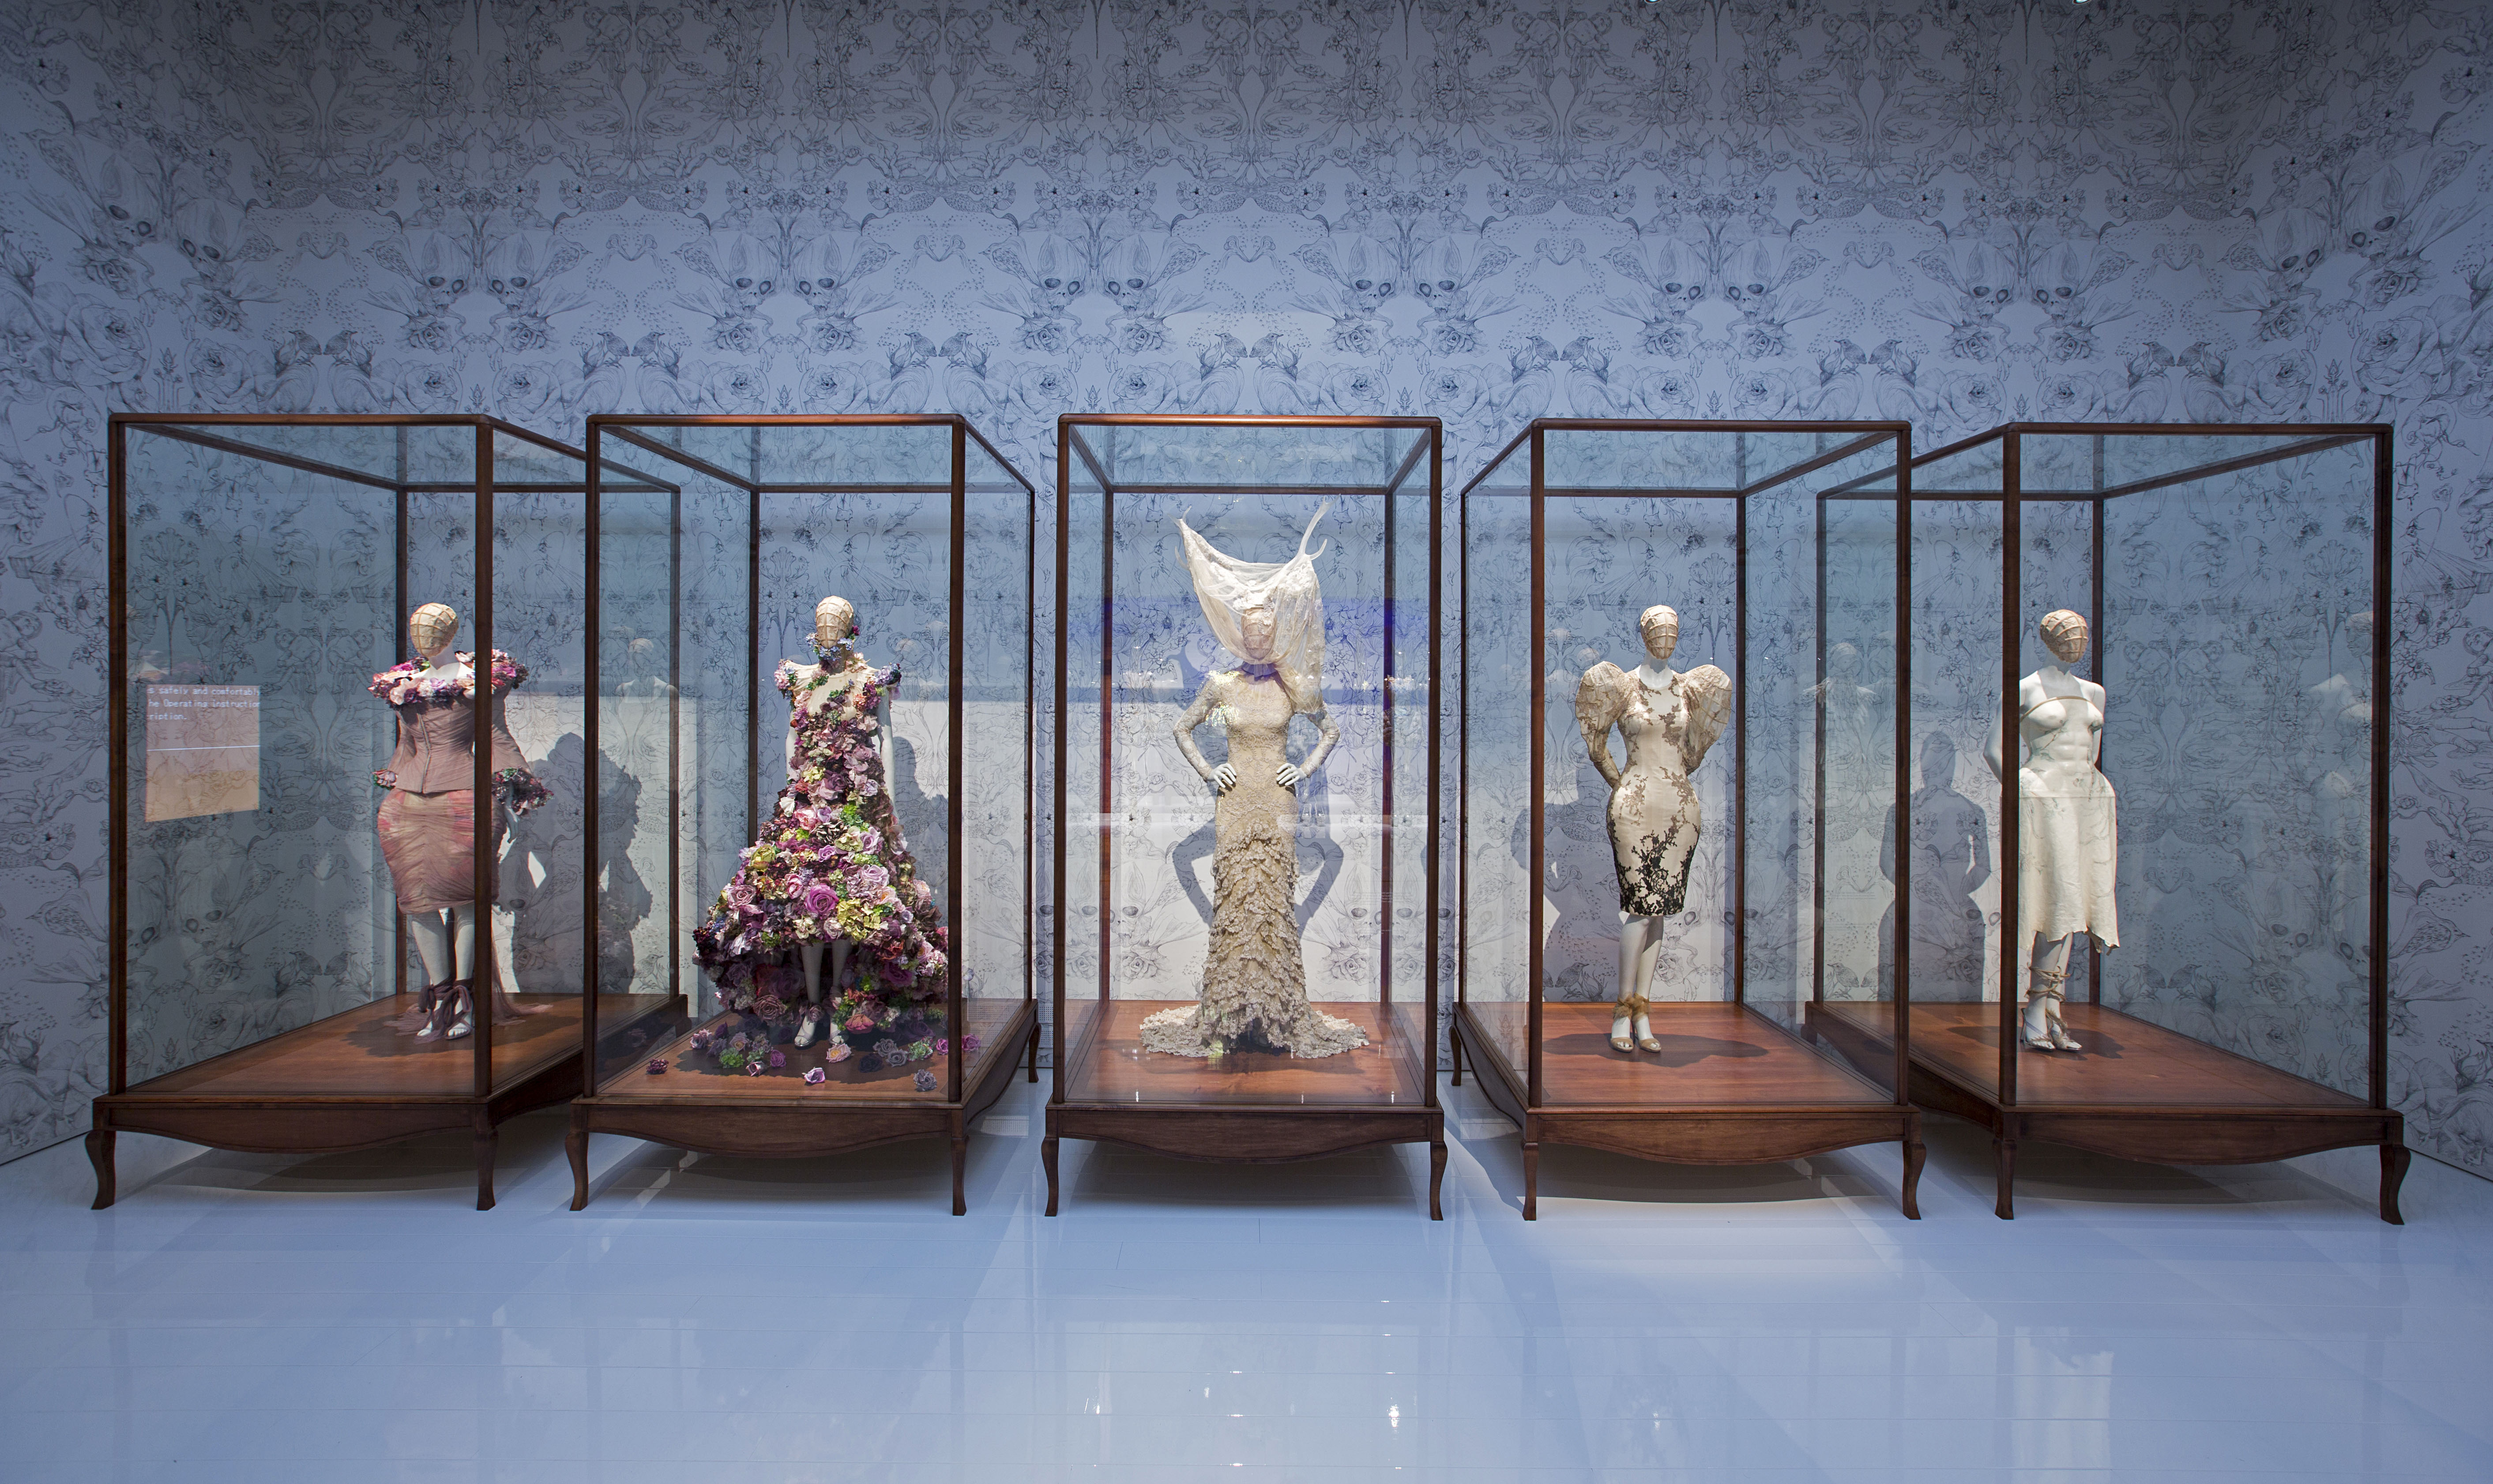 9. Installation view of 'Romantic Naturalism' gallery, Alexander McQueen Savage Beauty at the V&A (c) Victoria and Albert Museum London